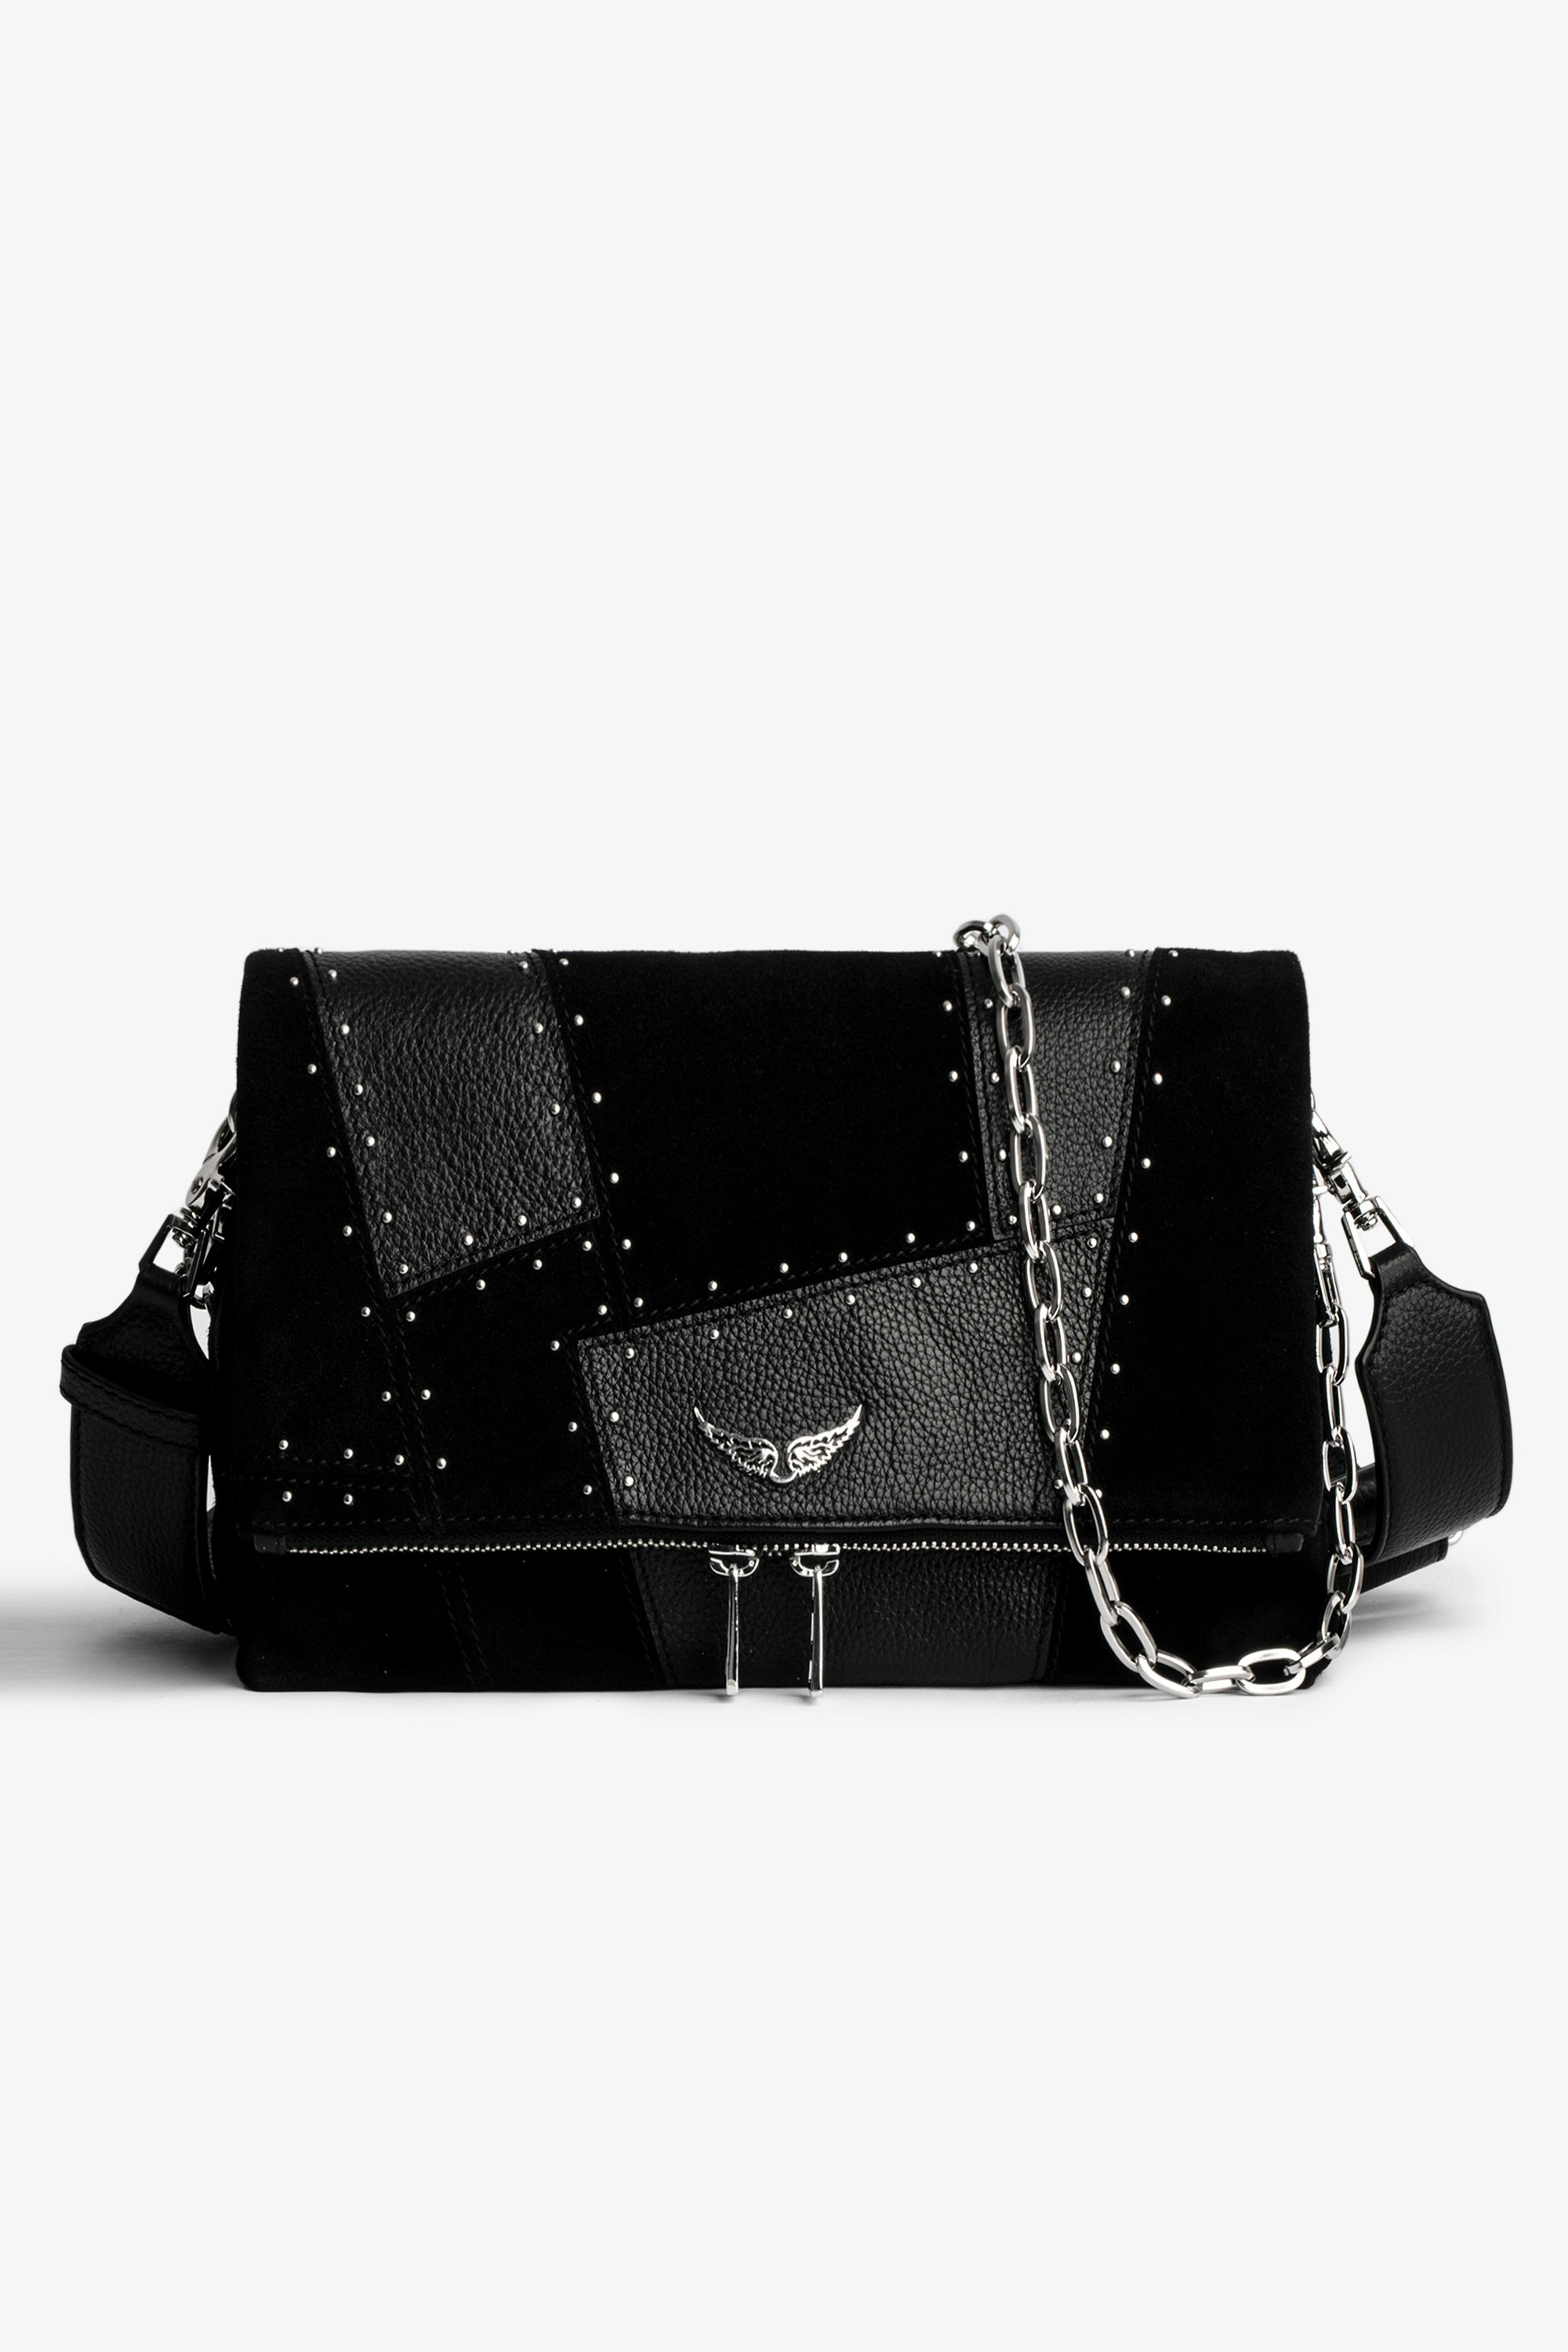 Rocky Patchwork Studs Bag Women’s shoulder bag in black leather patchwork with silver-tone studs 